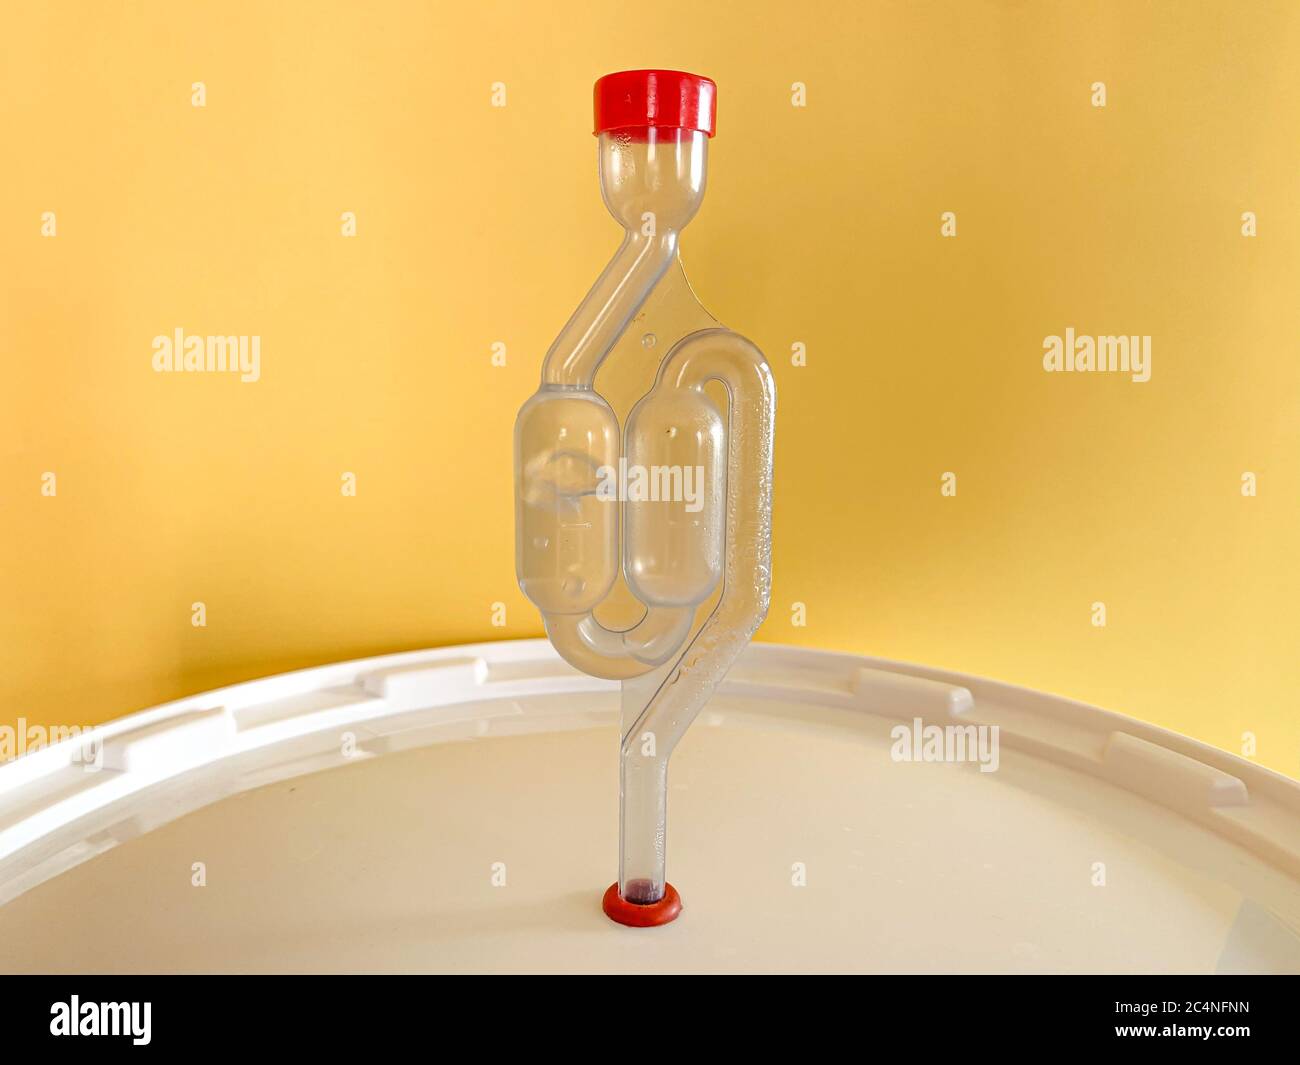 https://c8.alamy.com/comp/2C4NFNN/home-beer-brewery-in-progress-bubbling-airlock-on-fermentation-container-red-white-wine-brewery-2C4NFNN.jpg